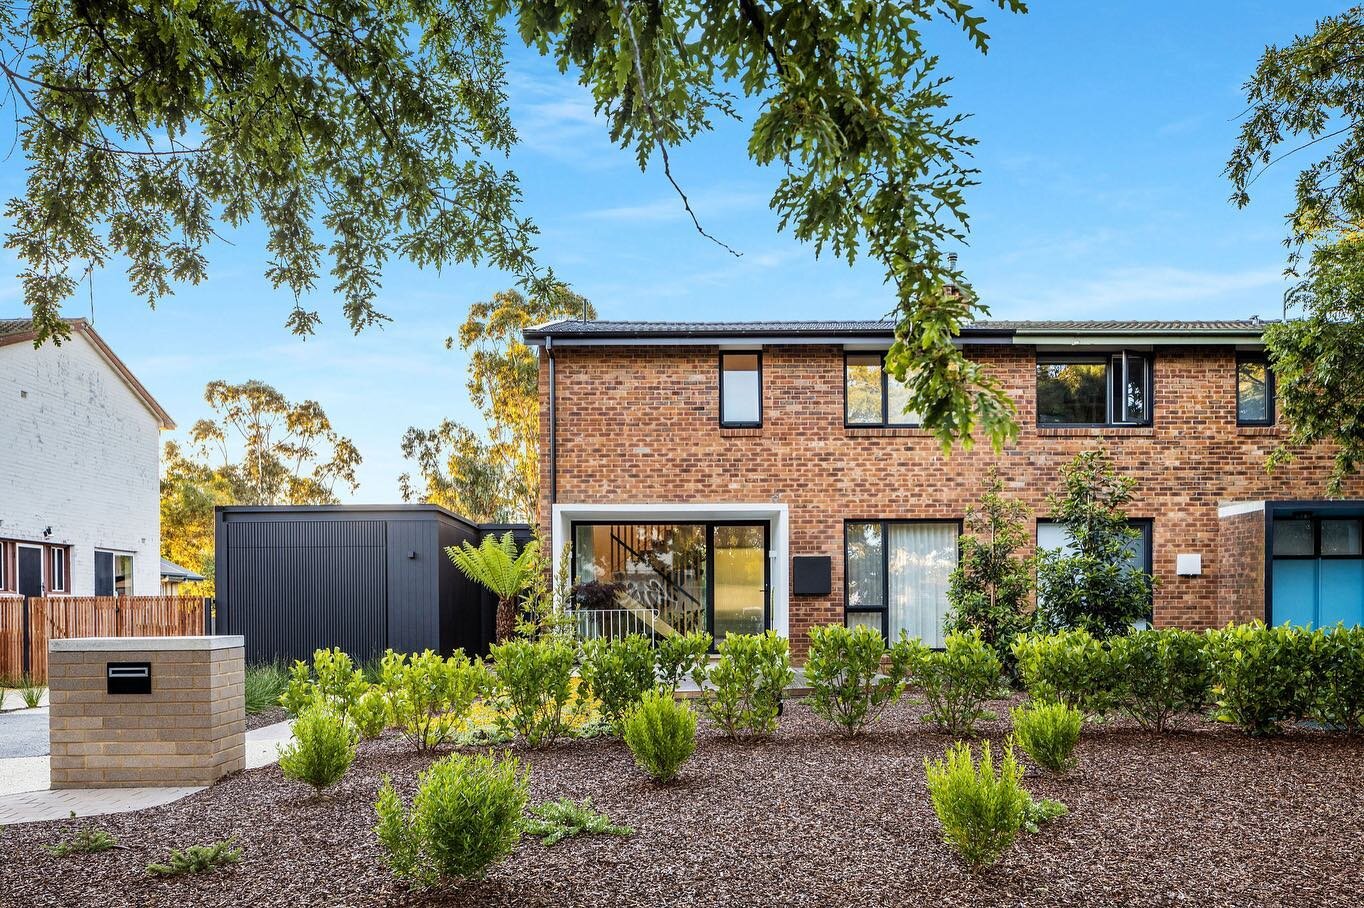 Ziwa House is an existing iconic brick duplex in Lyneham that has been extended and refurbished.

The intention was to open up the space and improve the connection to landscape.
We wanted to breathe life into the existing layout, while creating a for